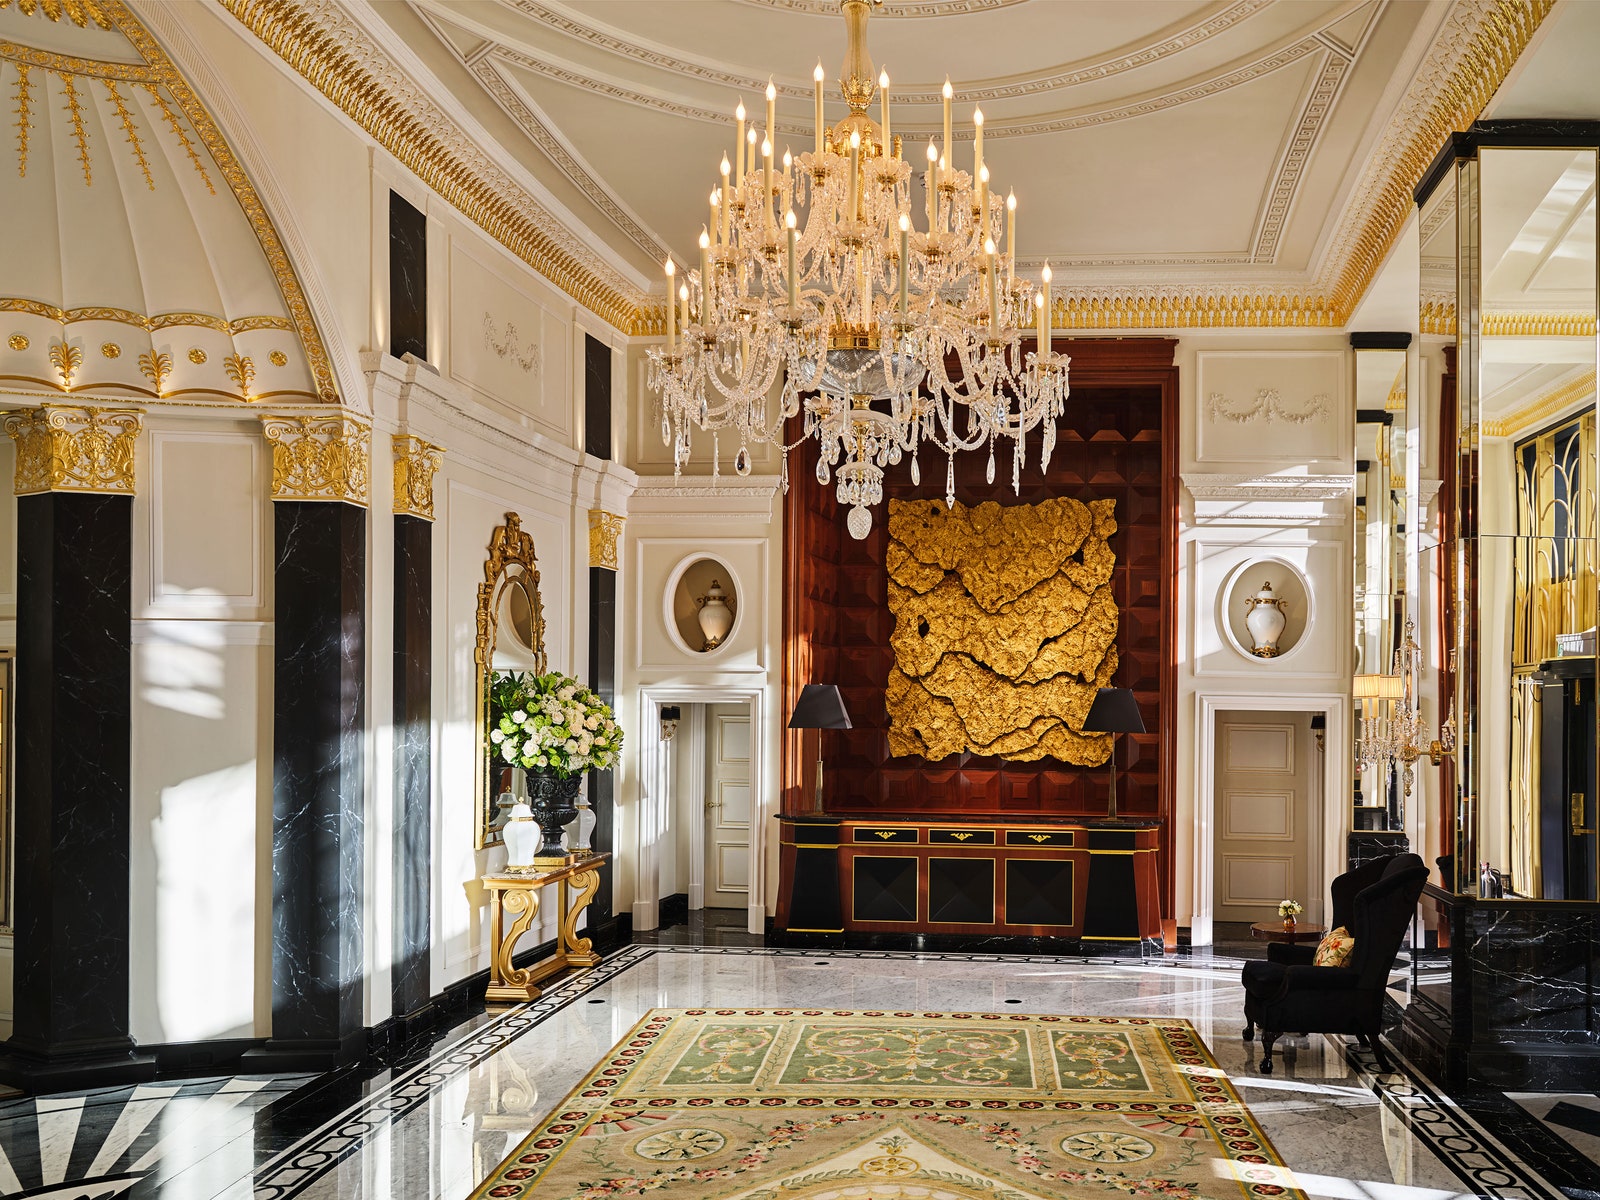 2023 Readers’ Choice Awards: The Top Hotels in London